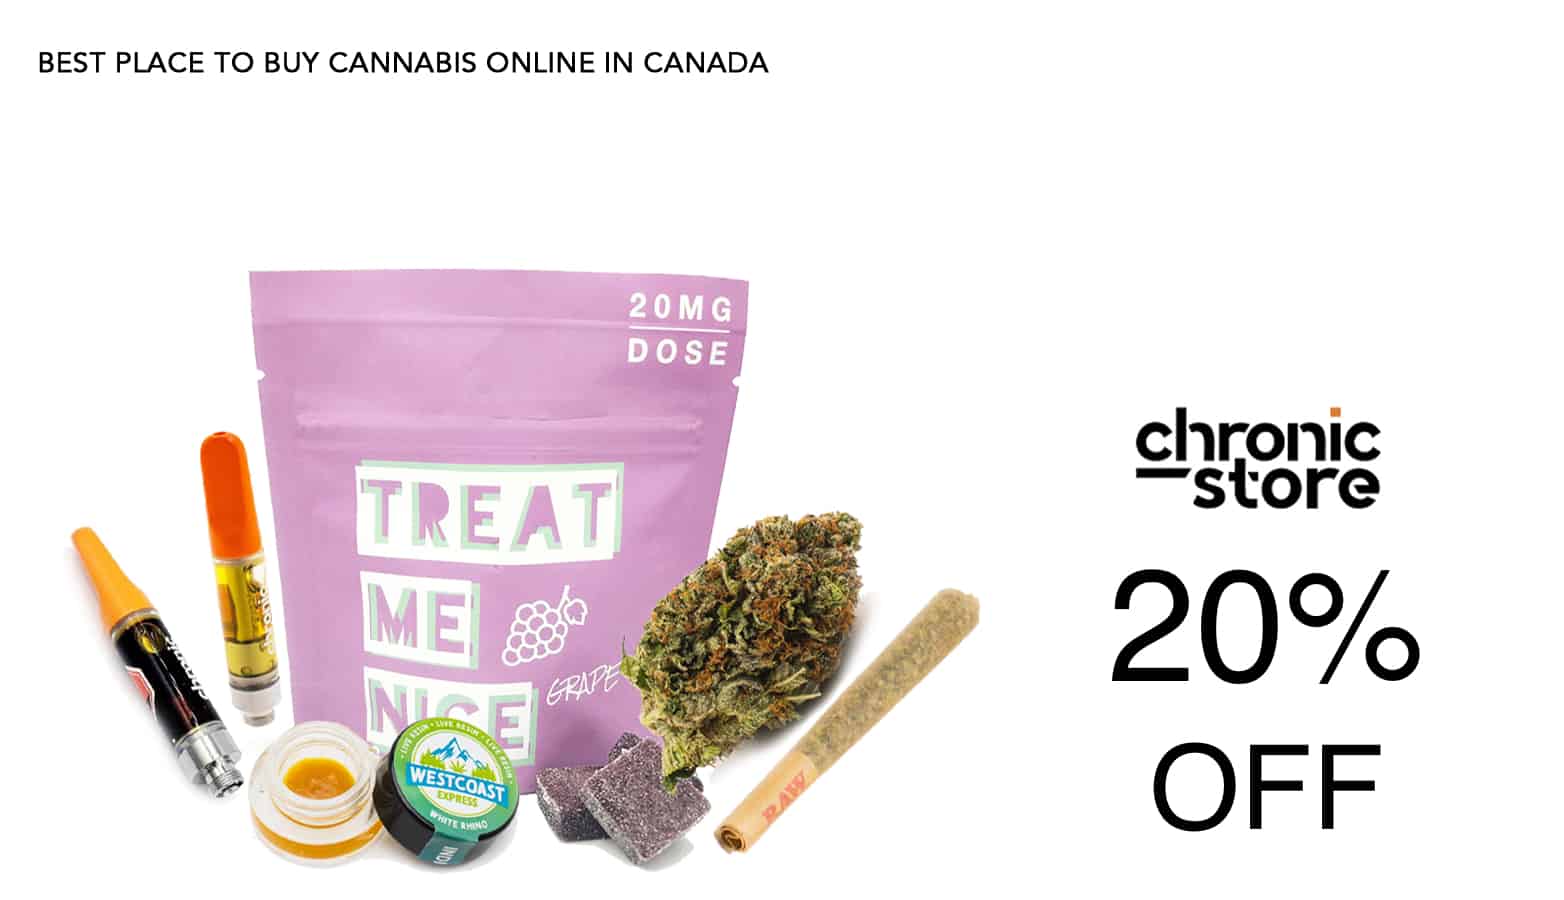 Chronic Store Discount - Save On Cannabis